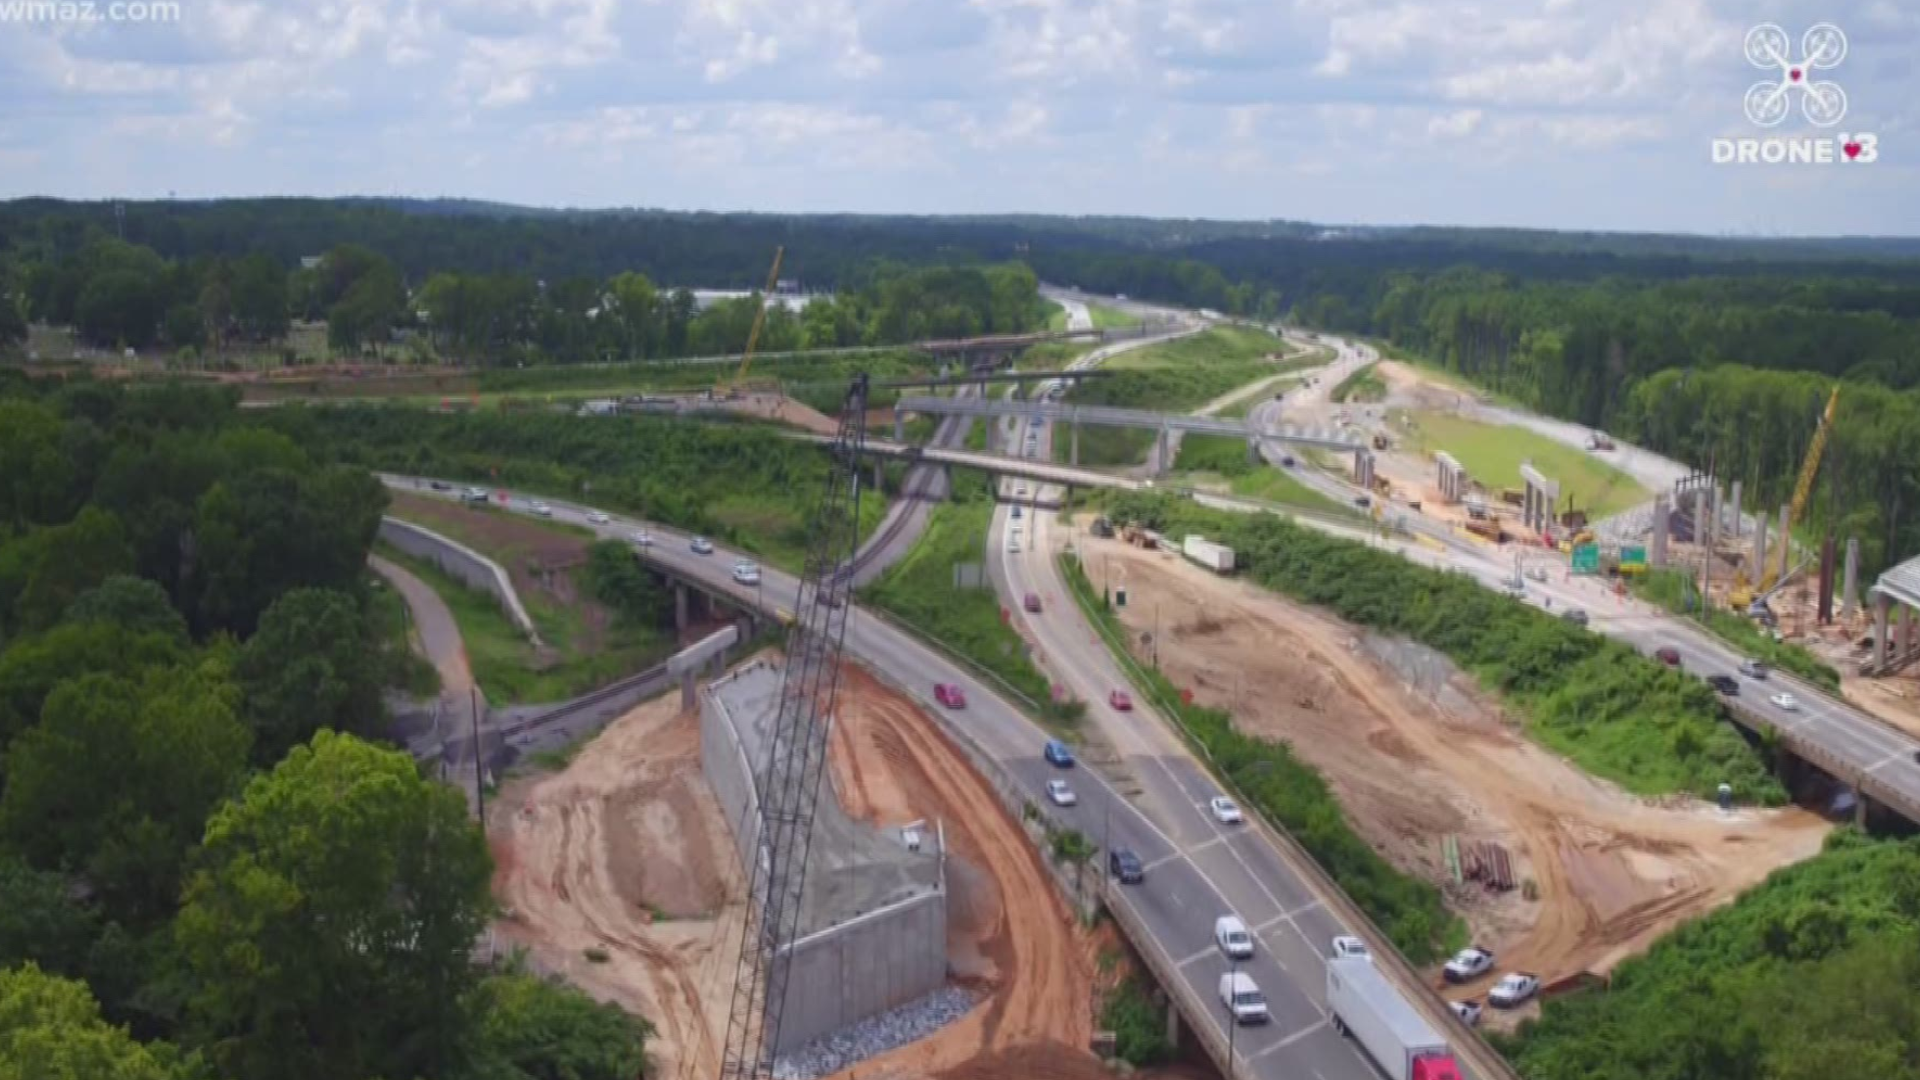 The Bibb County Sheriff's Office says they have a problem with people driving too fast on the interchange around construction zones. So they're cracking down on speeders.